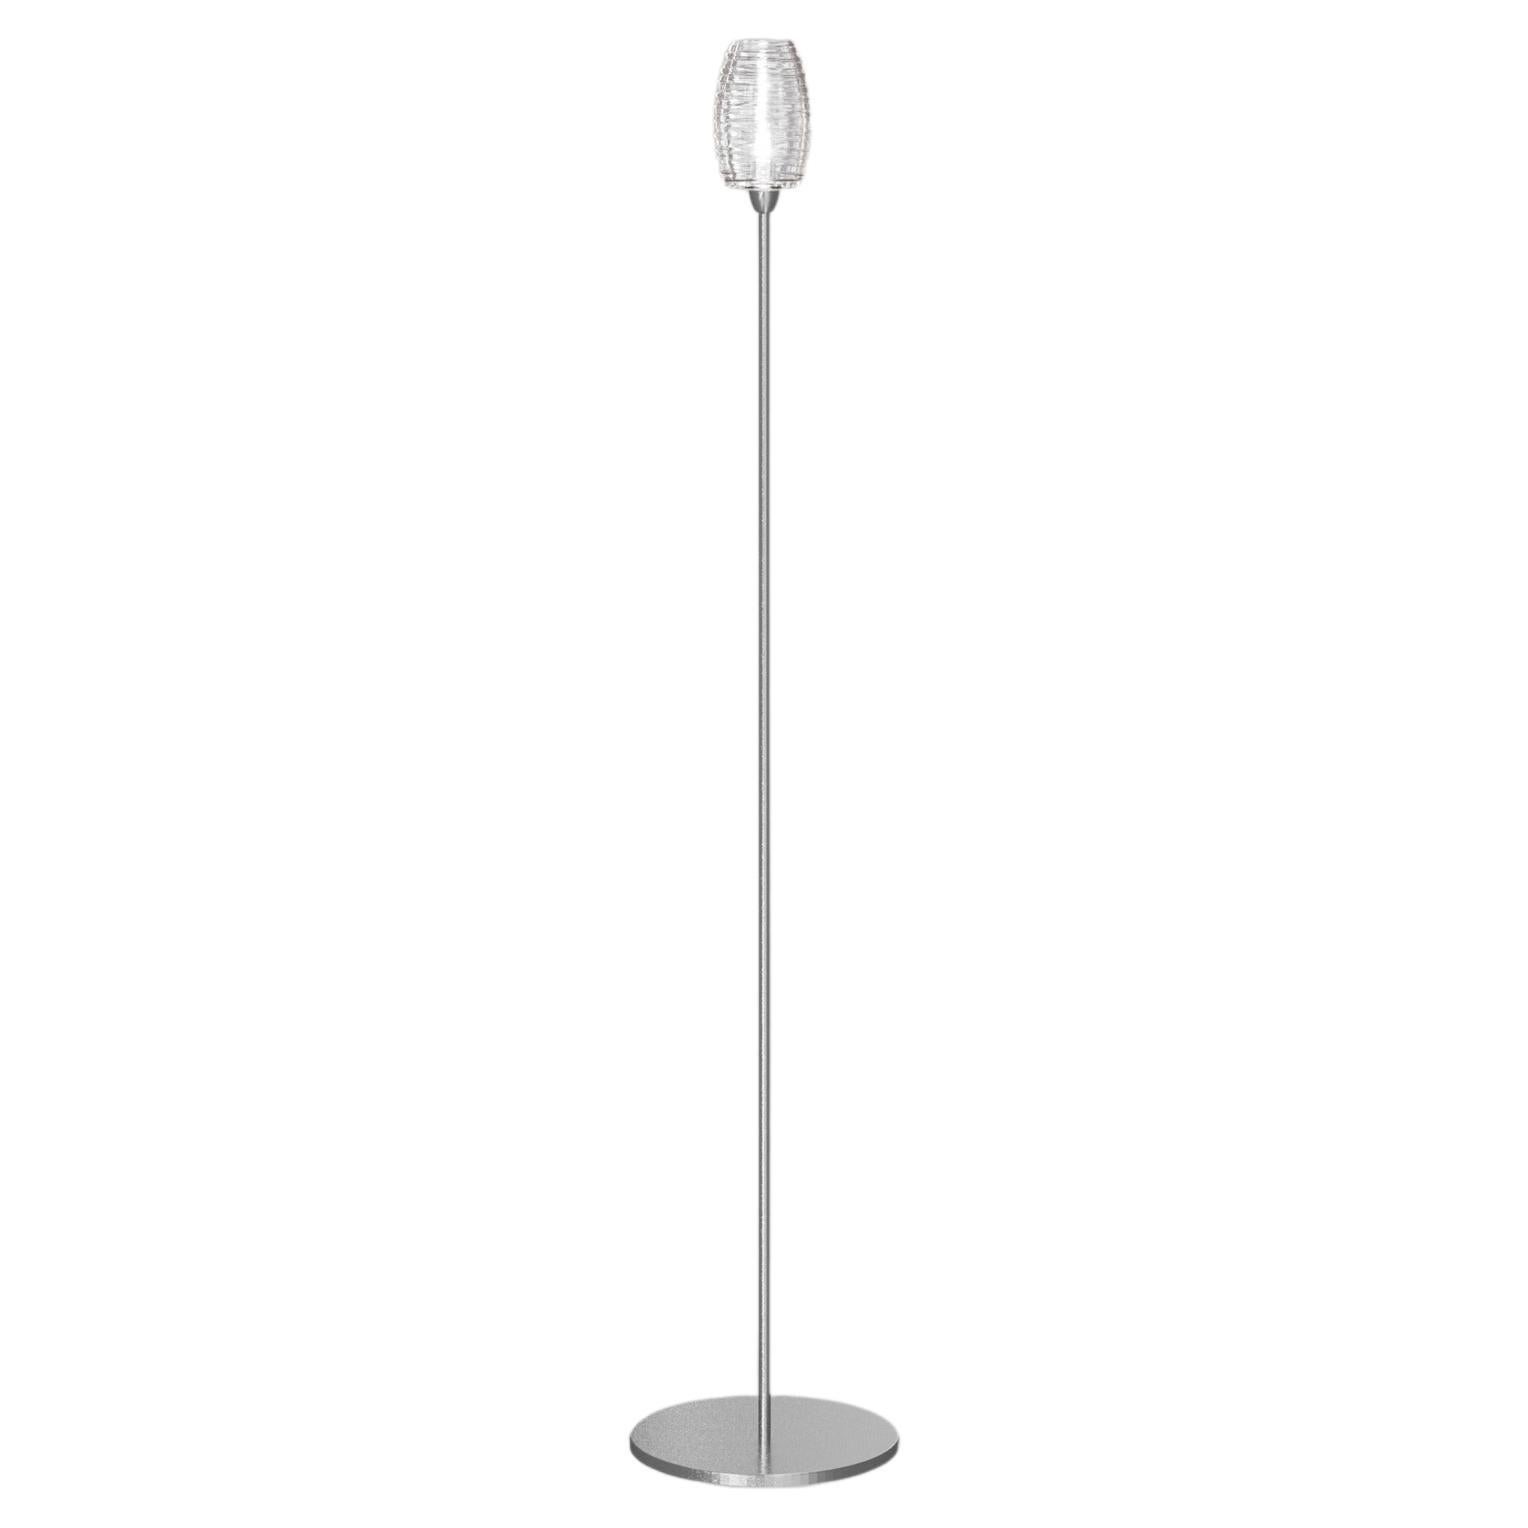 Vistosi Damascus 100 P Floor Lamp in Crystal Crystal by Paolo Crepax